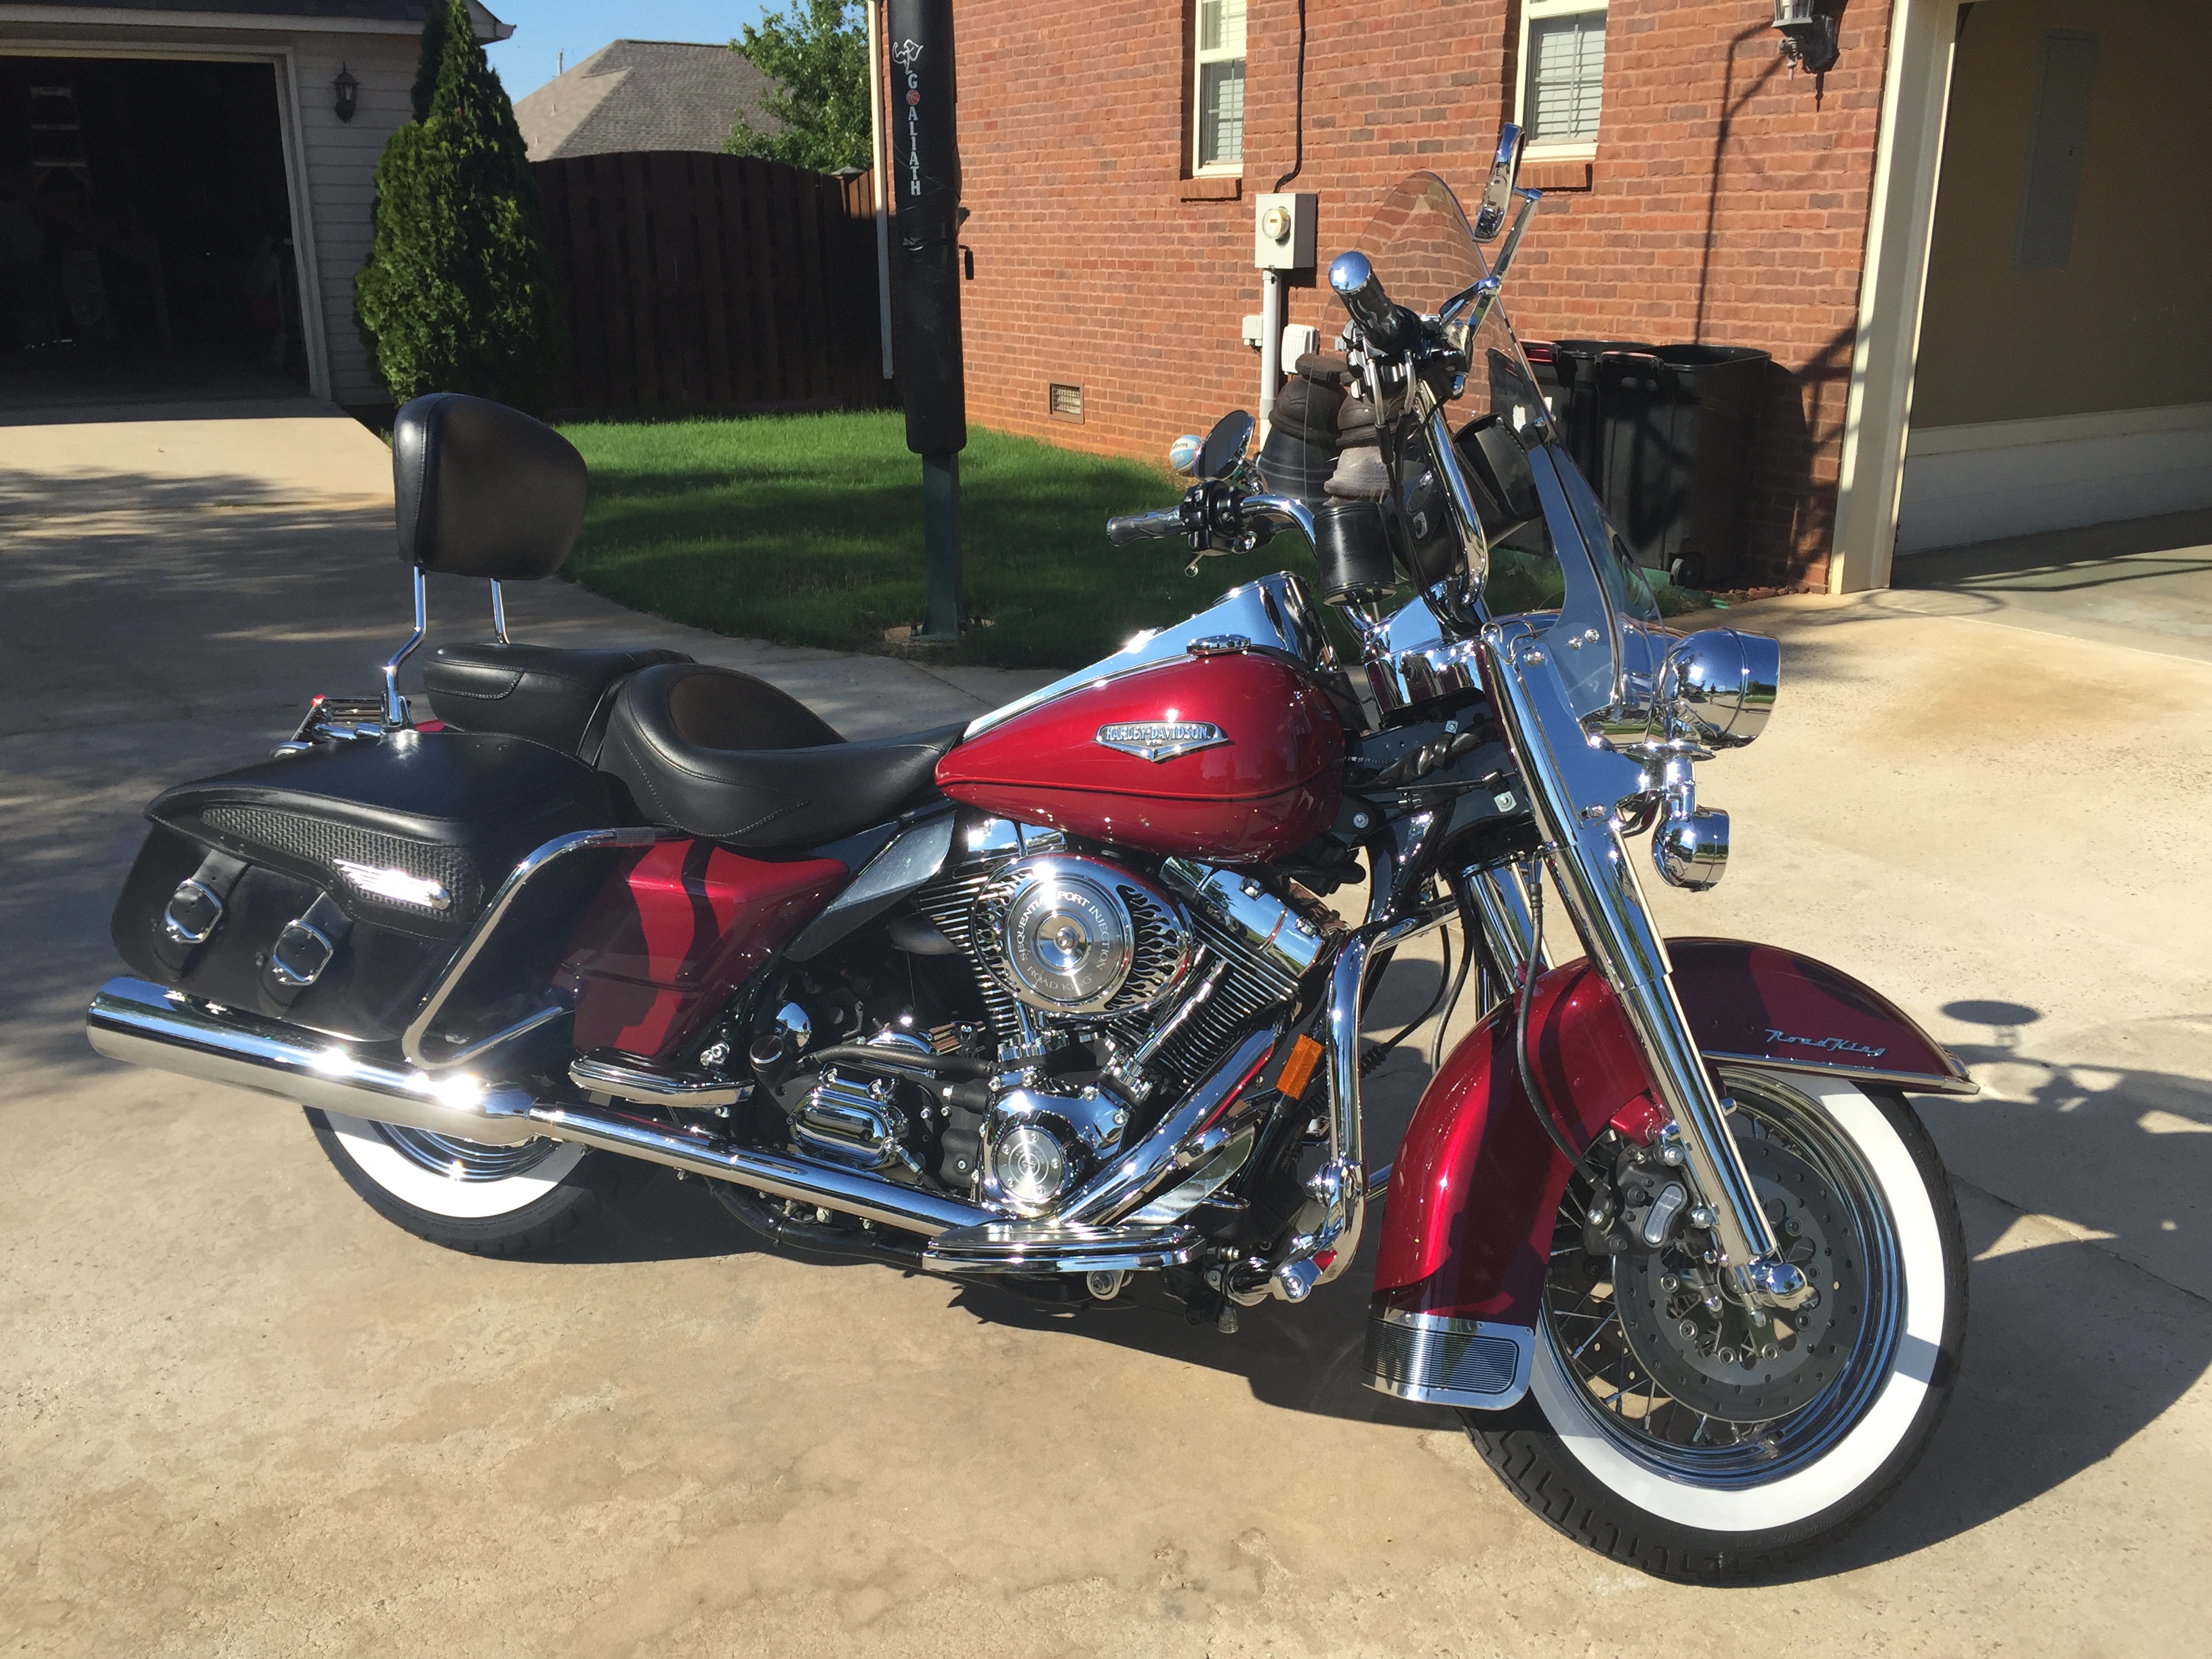 2006 Road King Classic - Harley Davidson Forums